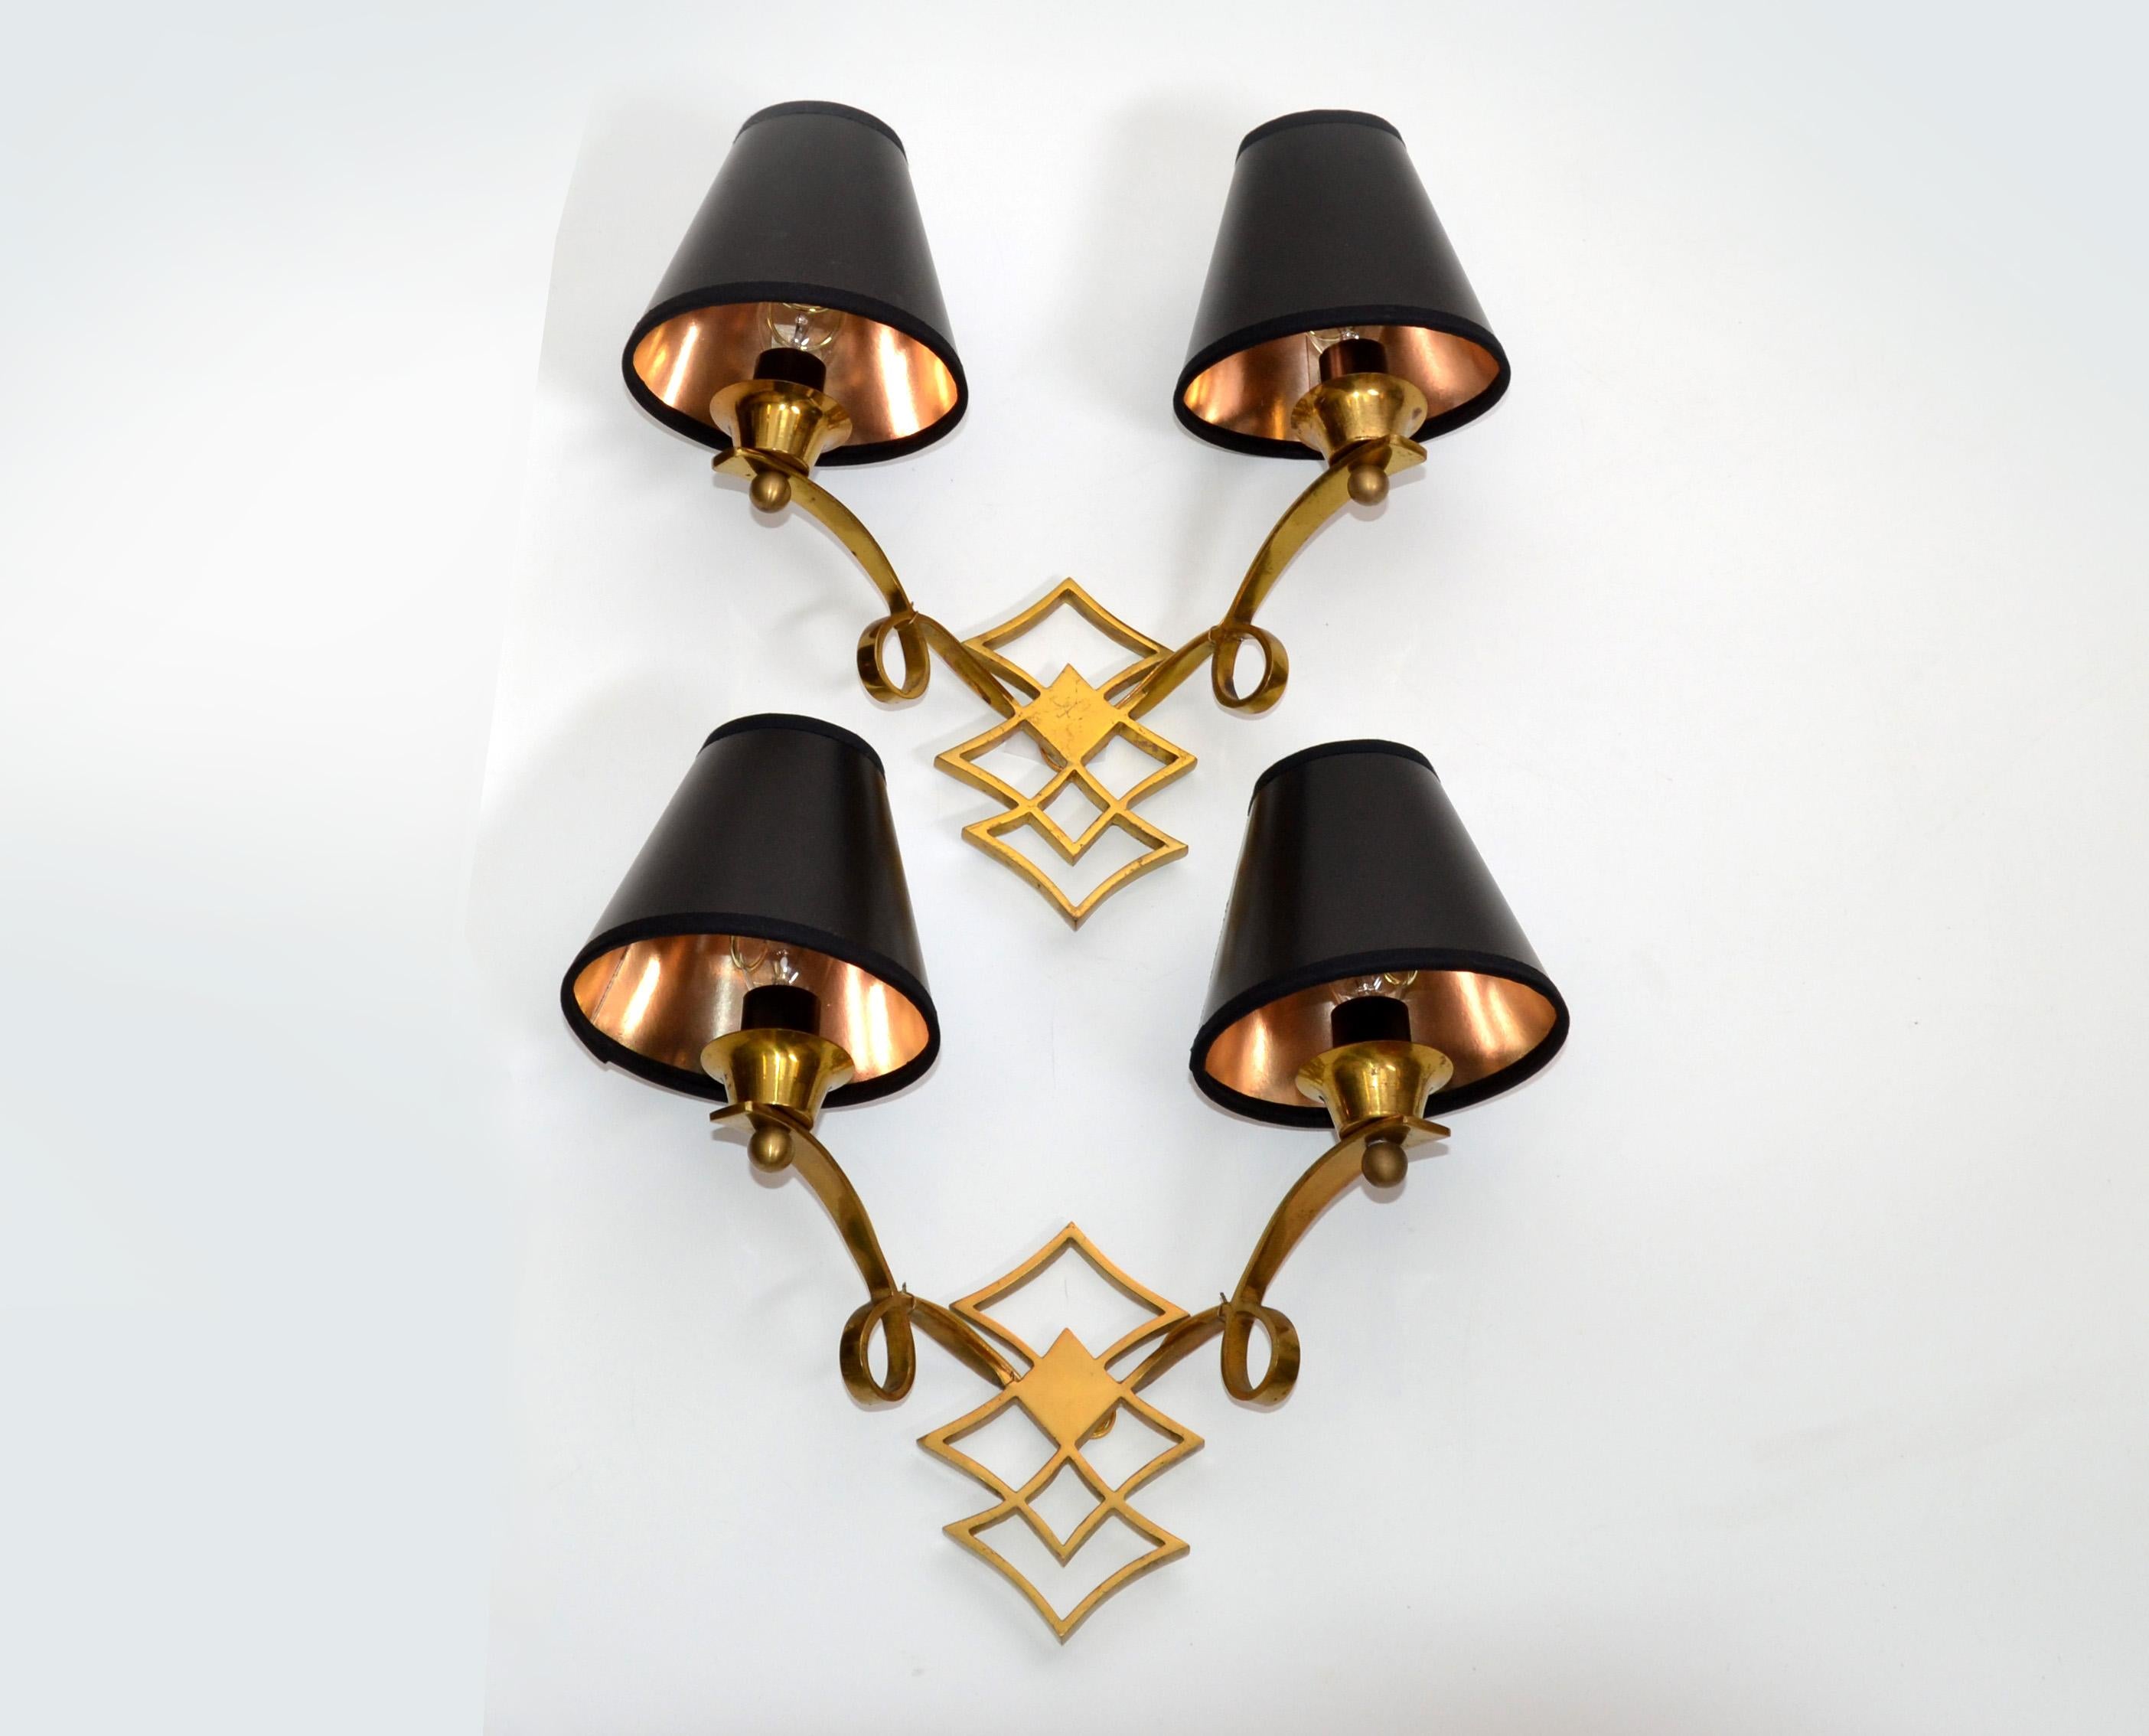 Very elegant pair of French Neoclassical brass sconces, wall lights Jules Leleu style from the 1950.
US rewiring and each sconce takes a 40 watts max light bulb, LED work too.
Sold with black & gold paper shades. 
Custom made junction box are